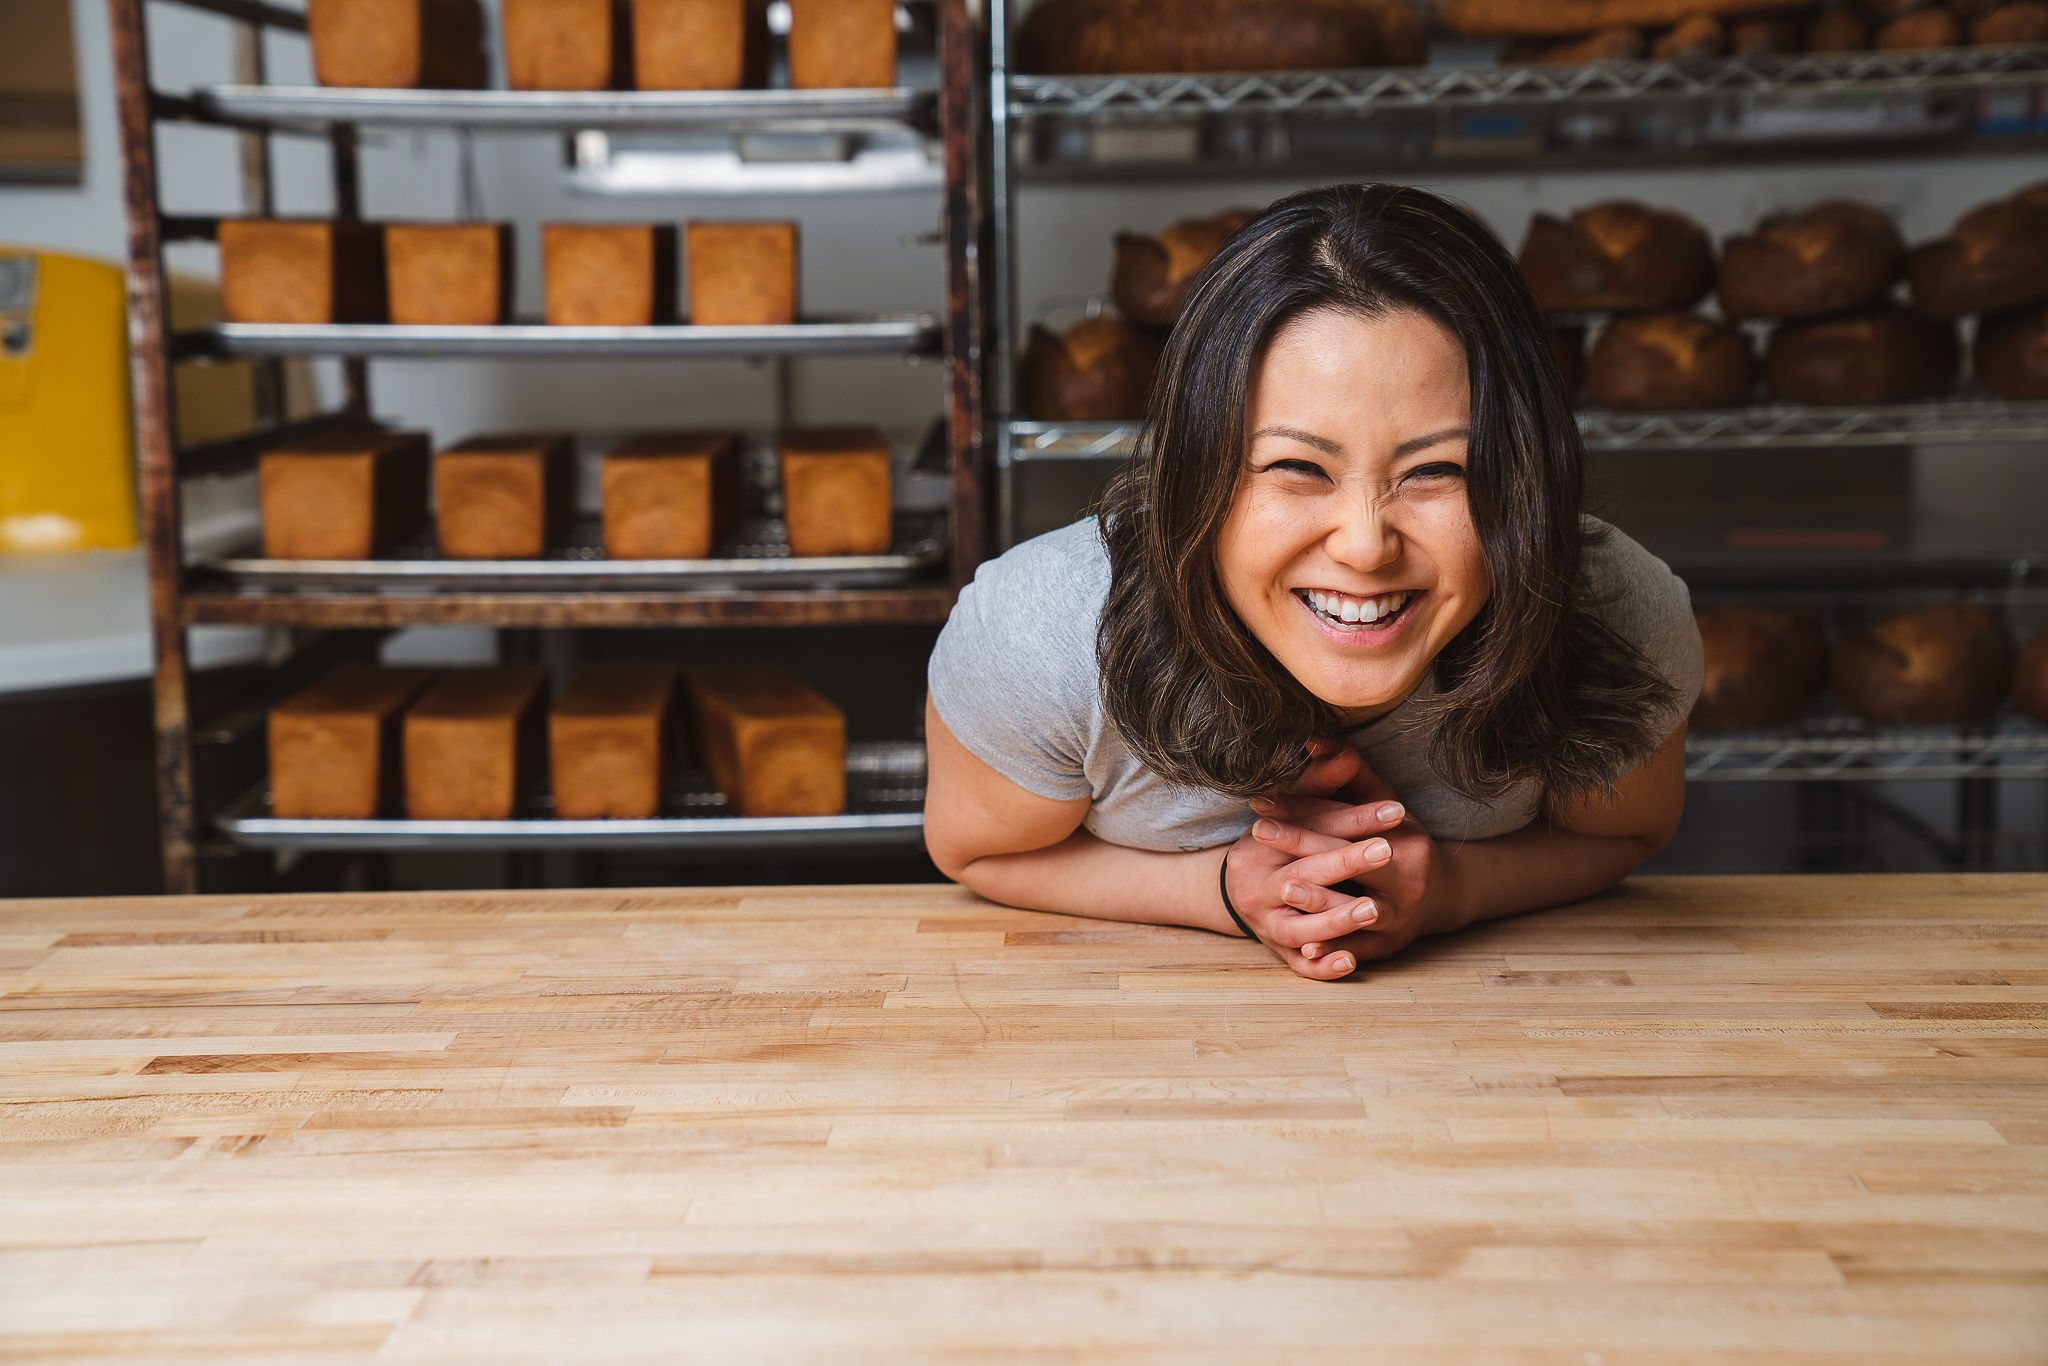 An Asian-American woman smiles and leans over a wooden table.